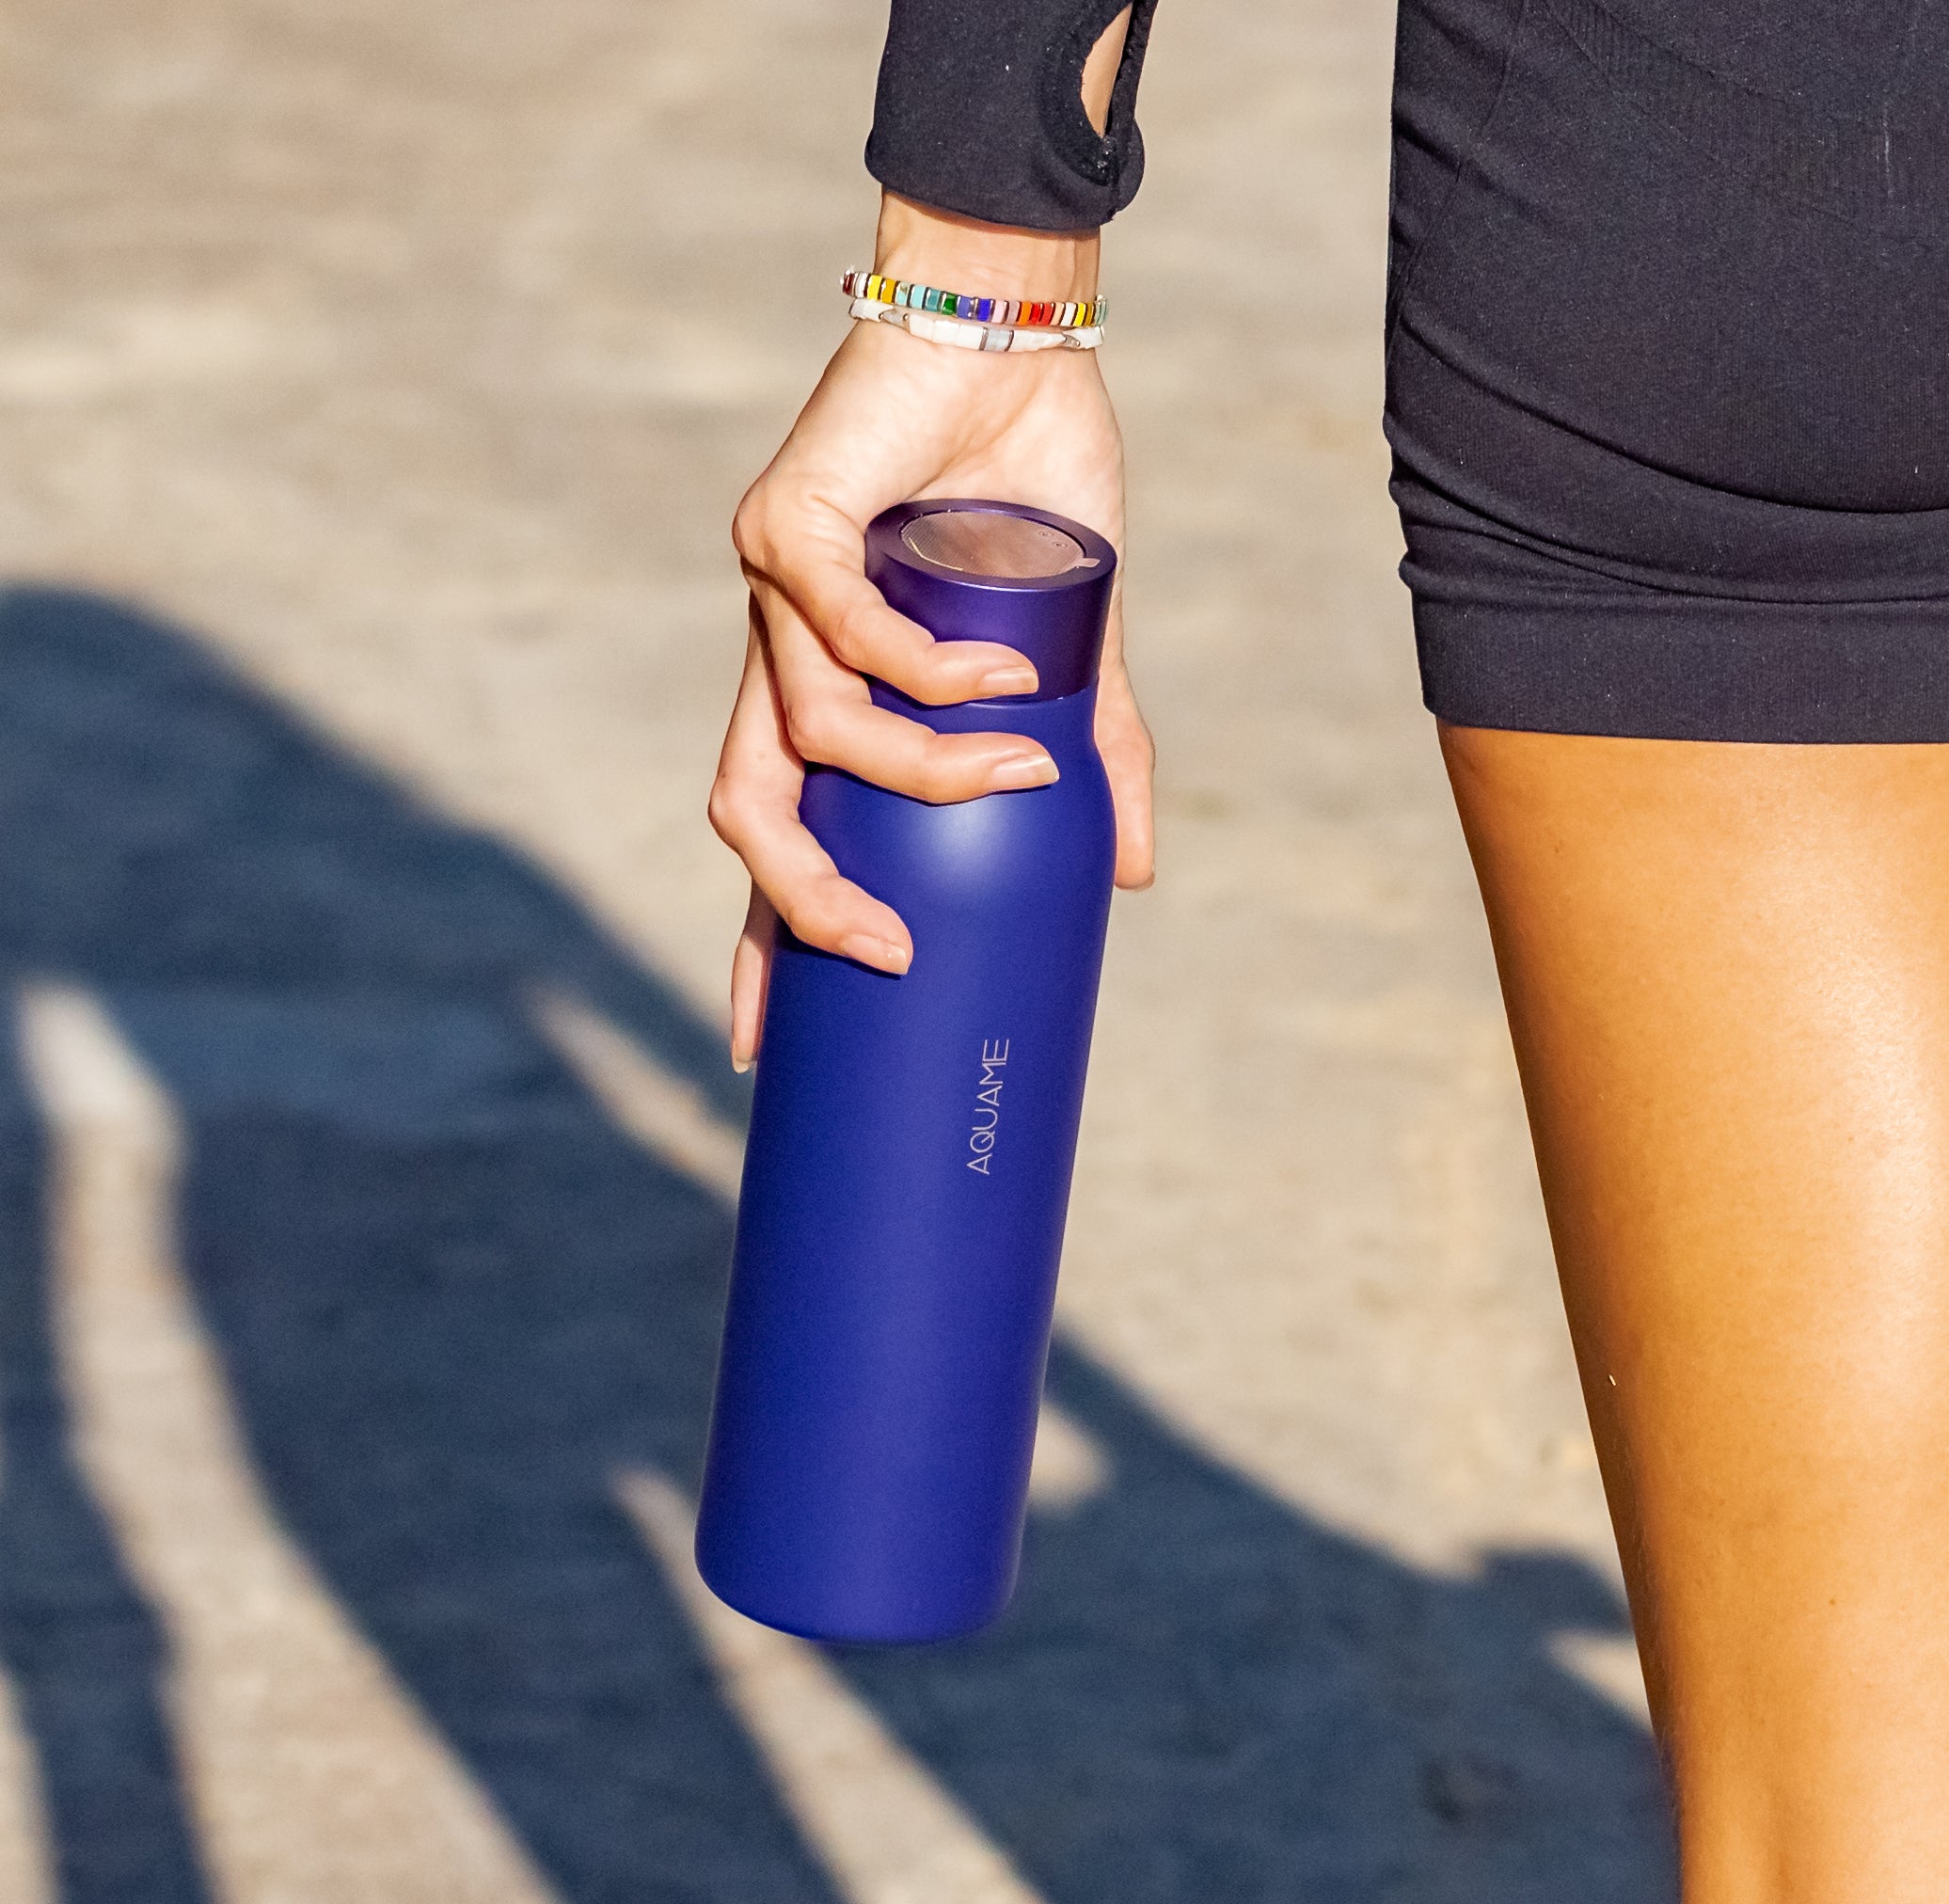 Australian Company Launches AQUAME, the Smart Water Bottle That